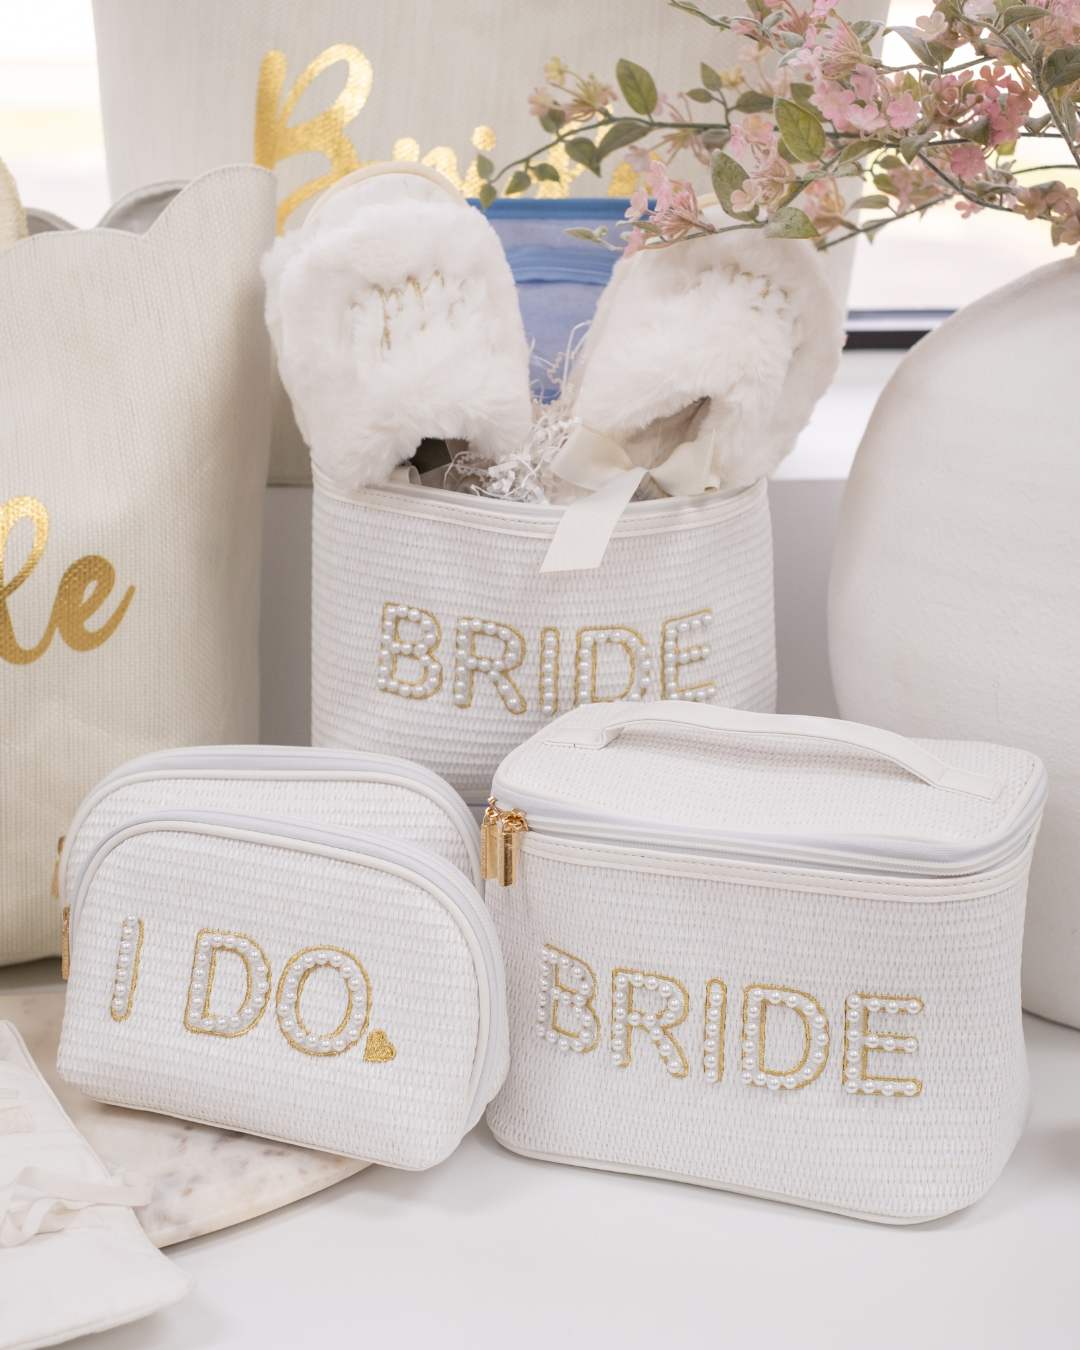 White Woven Pearl and Gold Stitching Embellished Zip Pouch "I DO" with Bridal Cosmetic Case, Tote Bags and Slippers